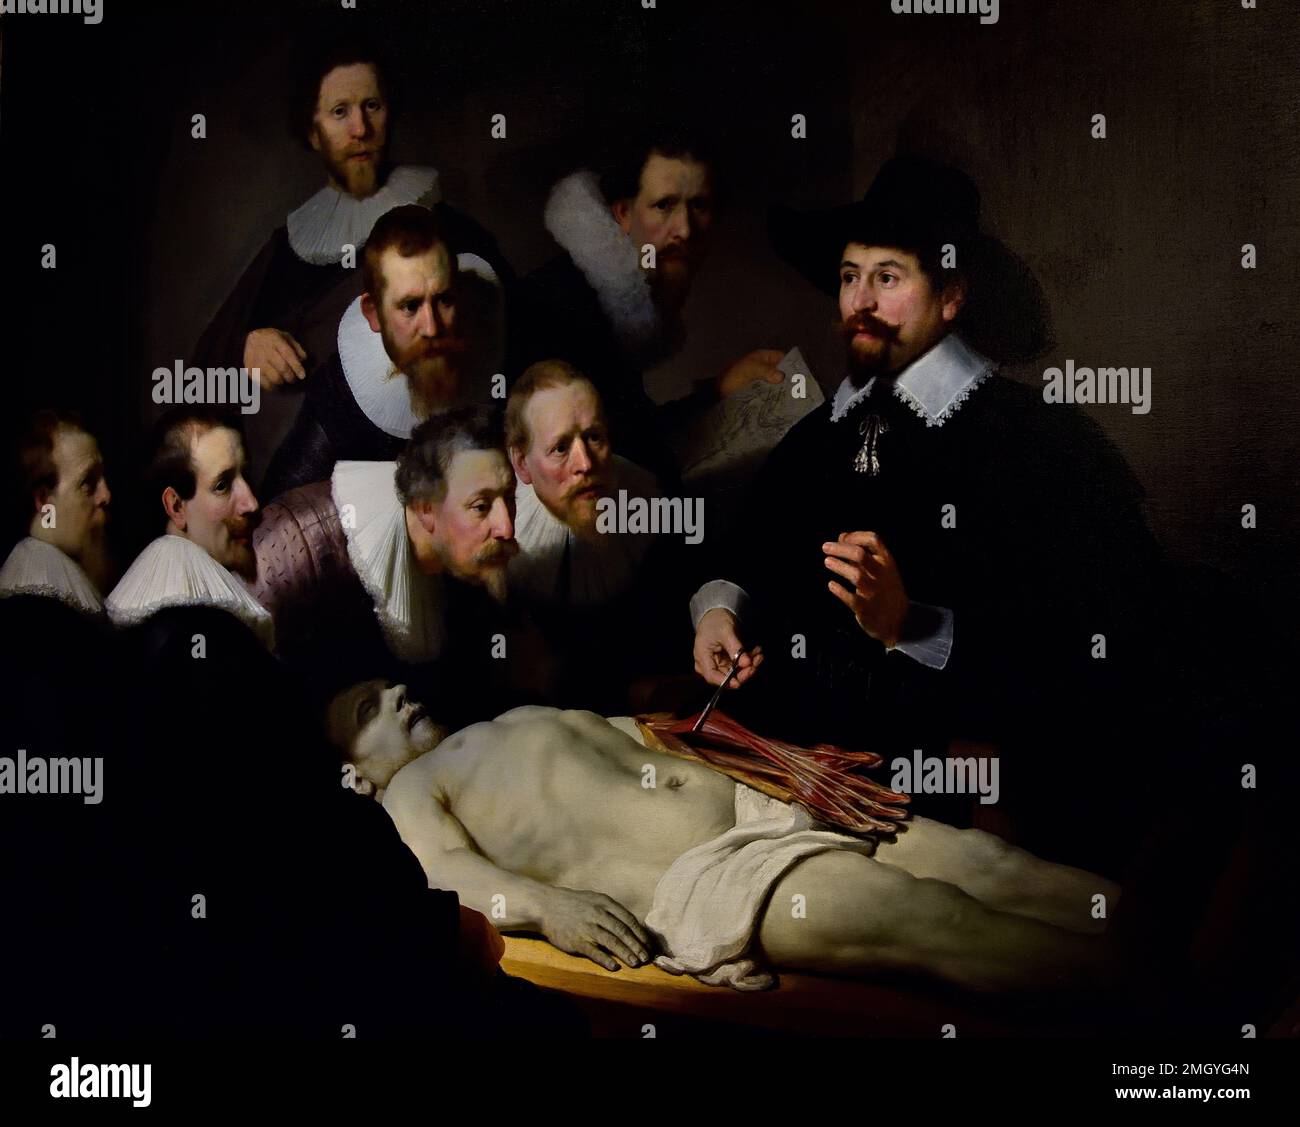 The Anatomy Lesson of Dr Nicolaes Tulp 1632 Rembrandt, Rembrandt Harmenszoon van Rijn, 1606-1669, The, Netherlands, Dutch, Stock Photo